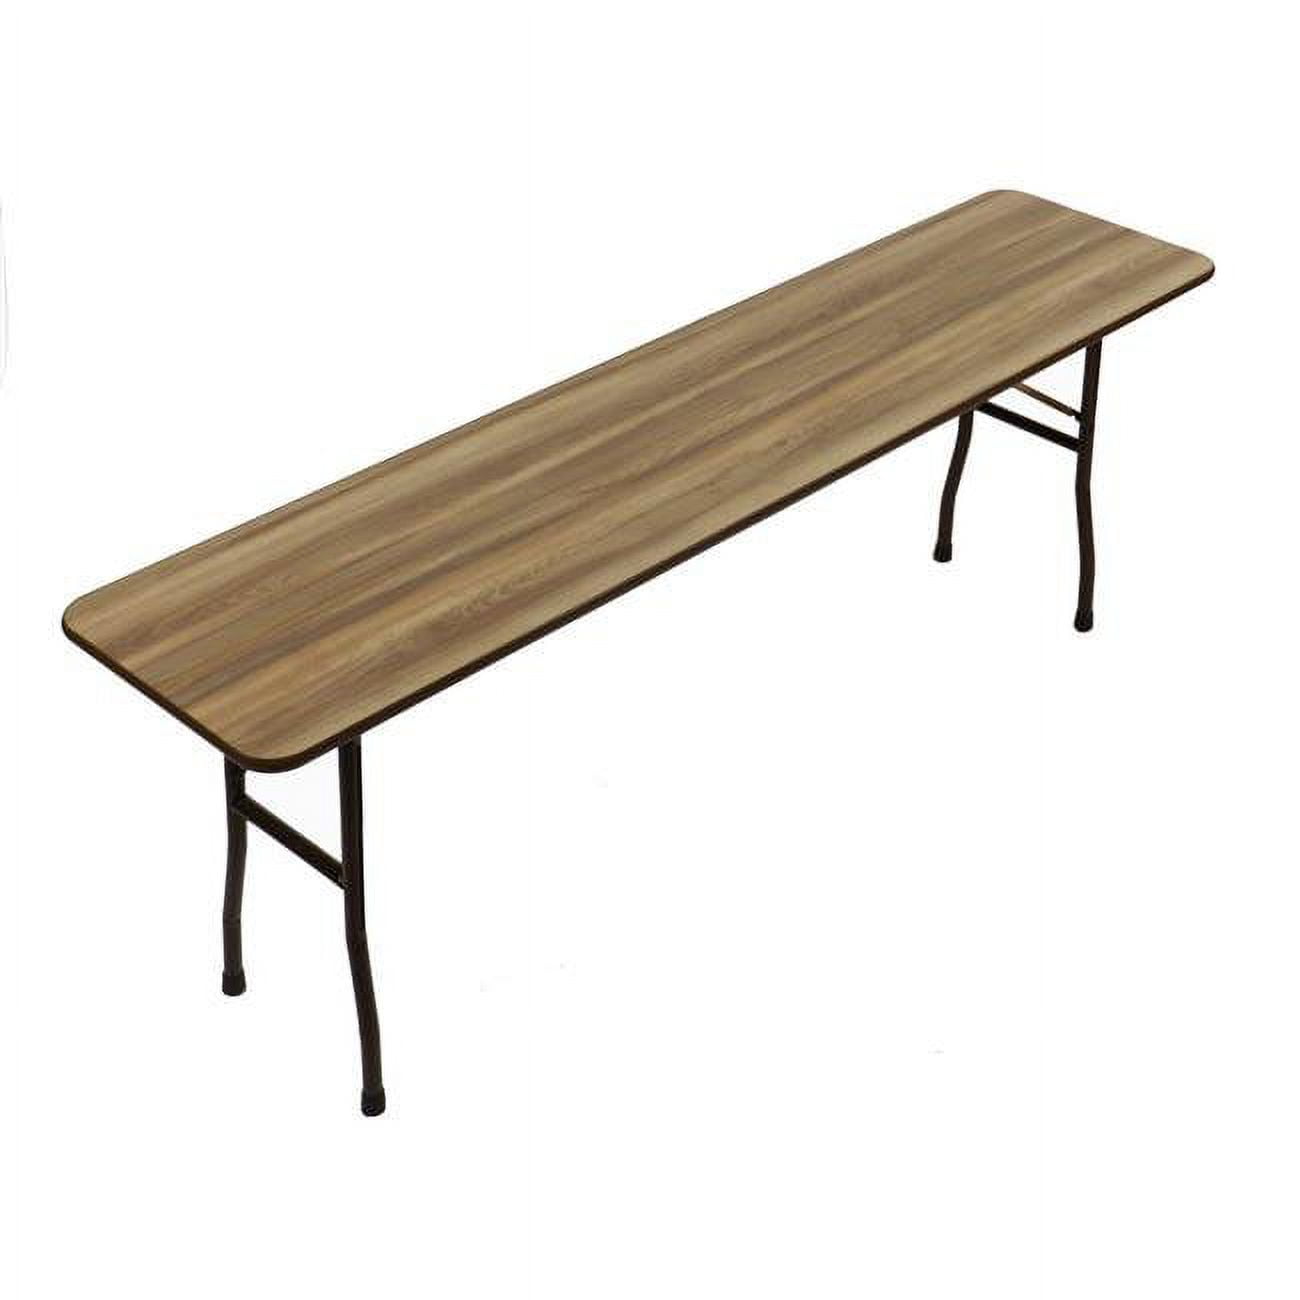 Picture of Correll CF60PX-53 0.75 in. High Pressure Rectangular Top Folding Tables, Colonial Hickory - 60 in.